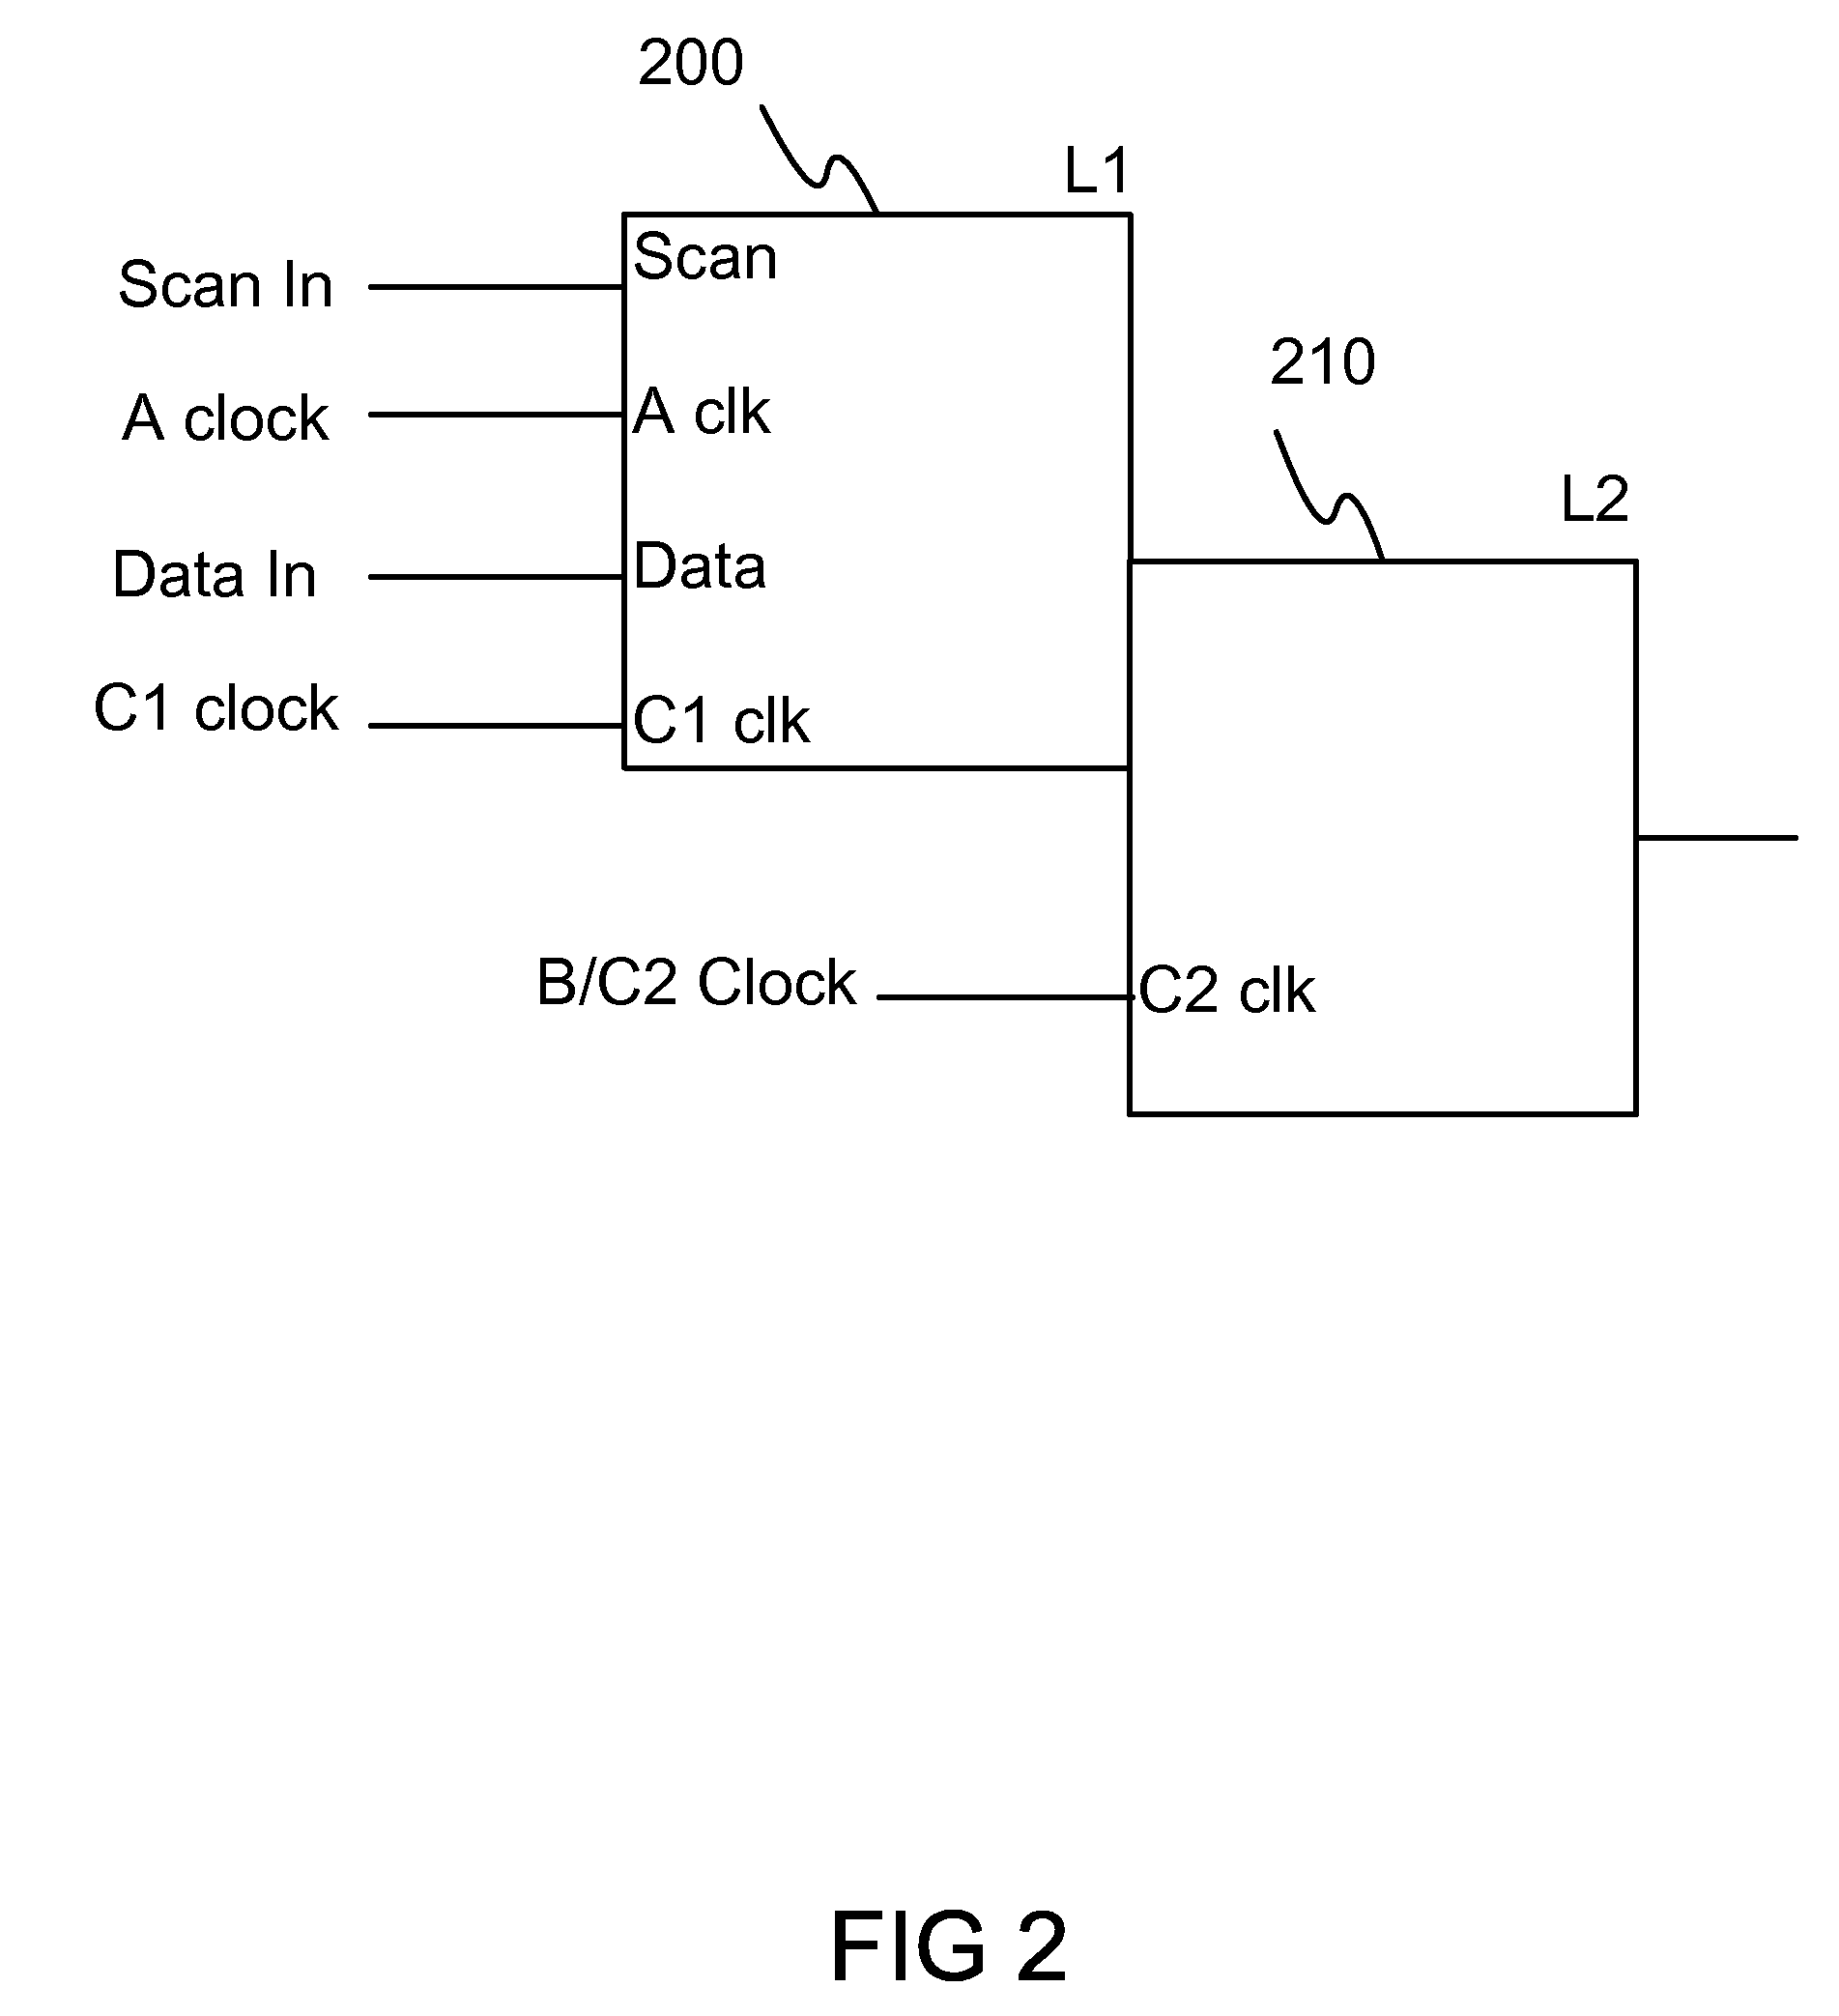 Measuring and predicting VLSI chip reliability and failure